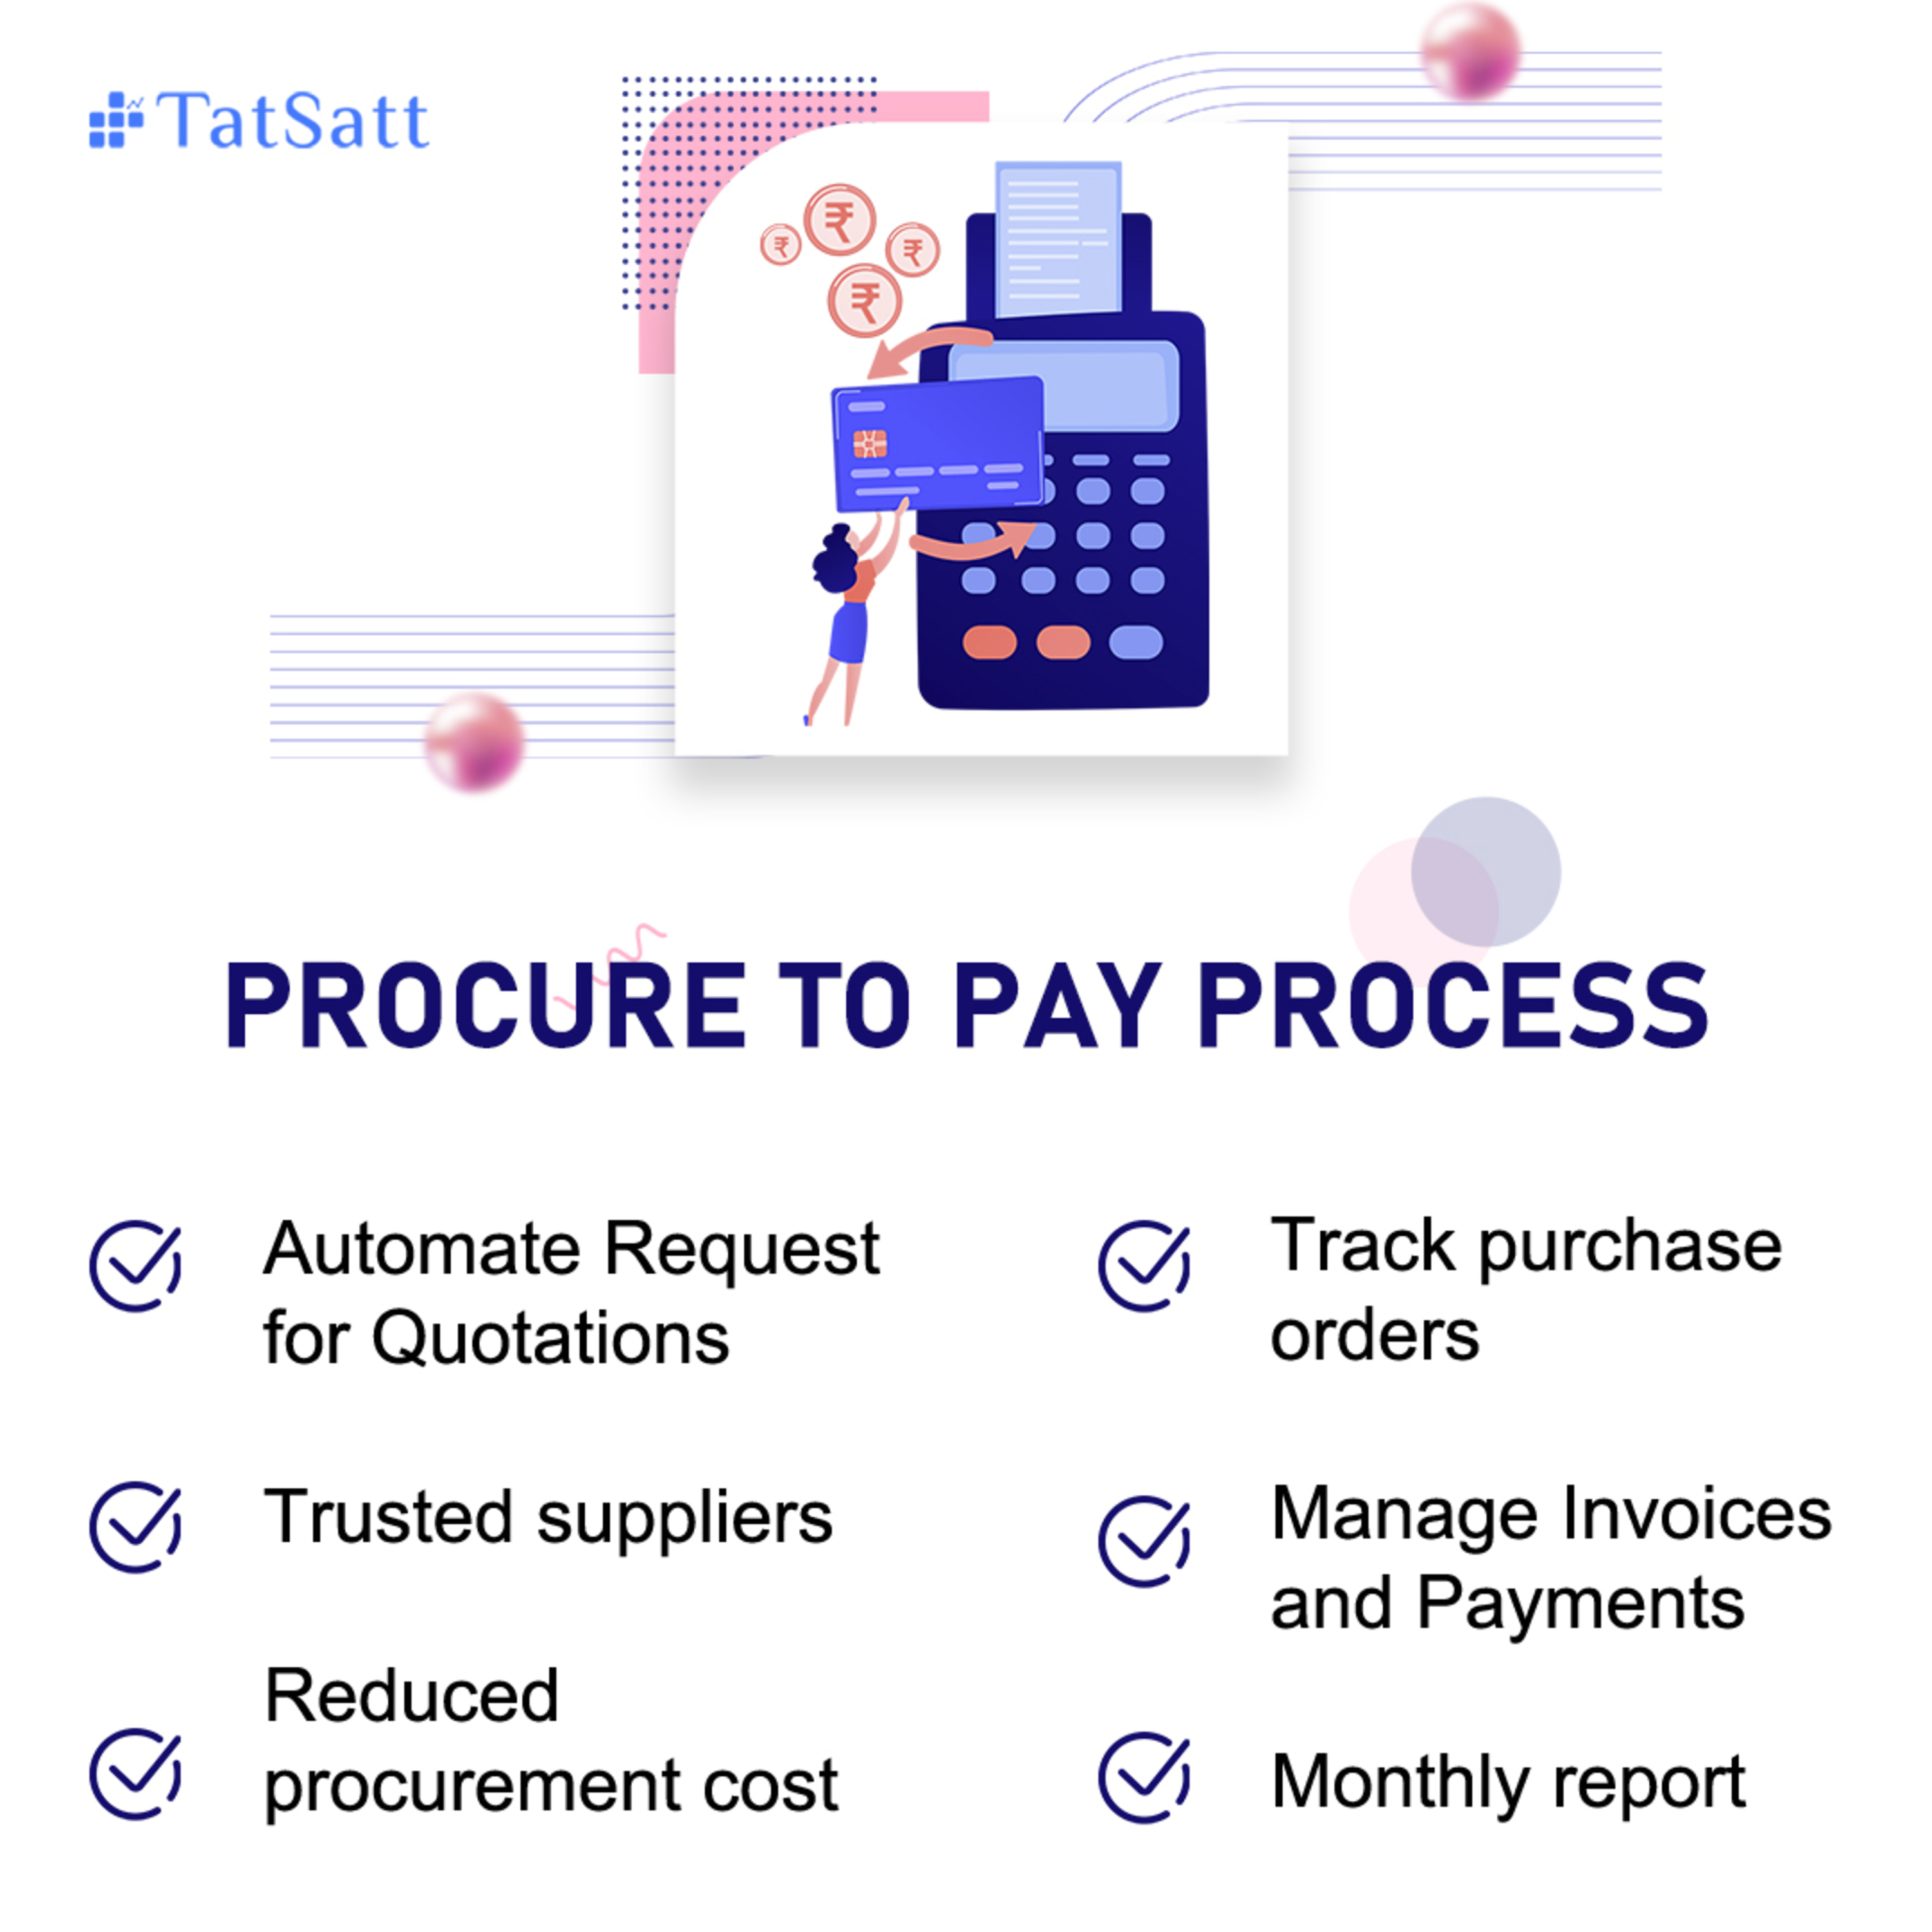 tatsatt.com is a B2B online solution for buyers and sellers. it helps users in the purchasing process.